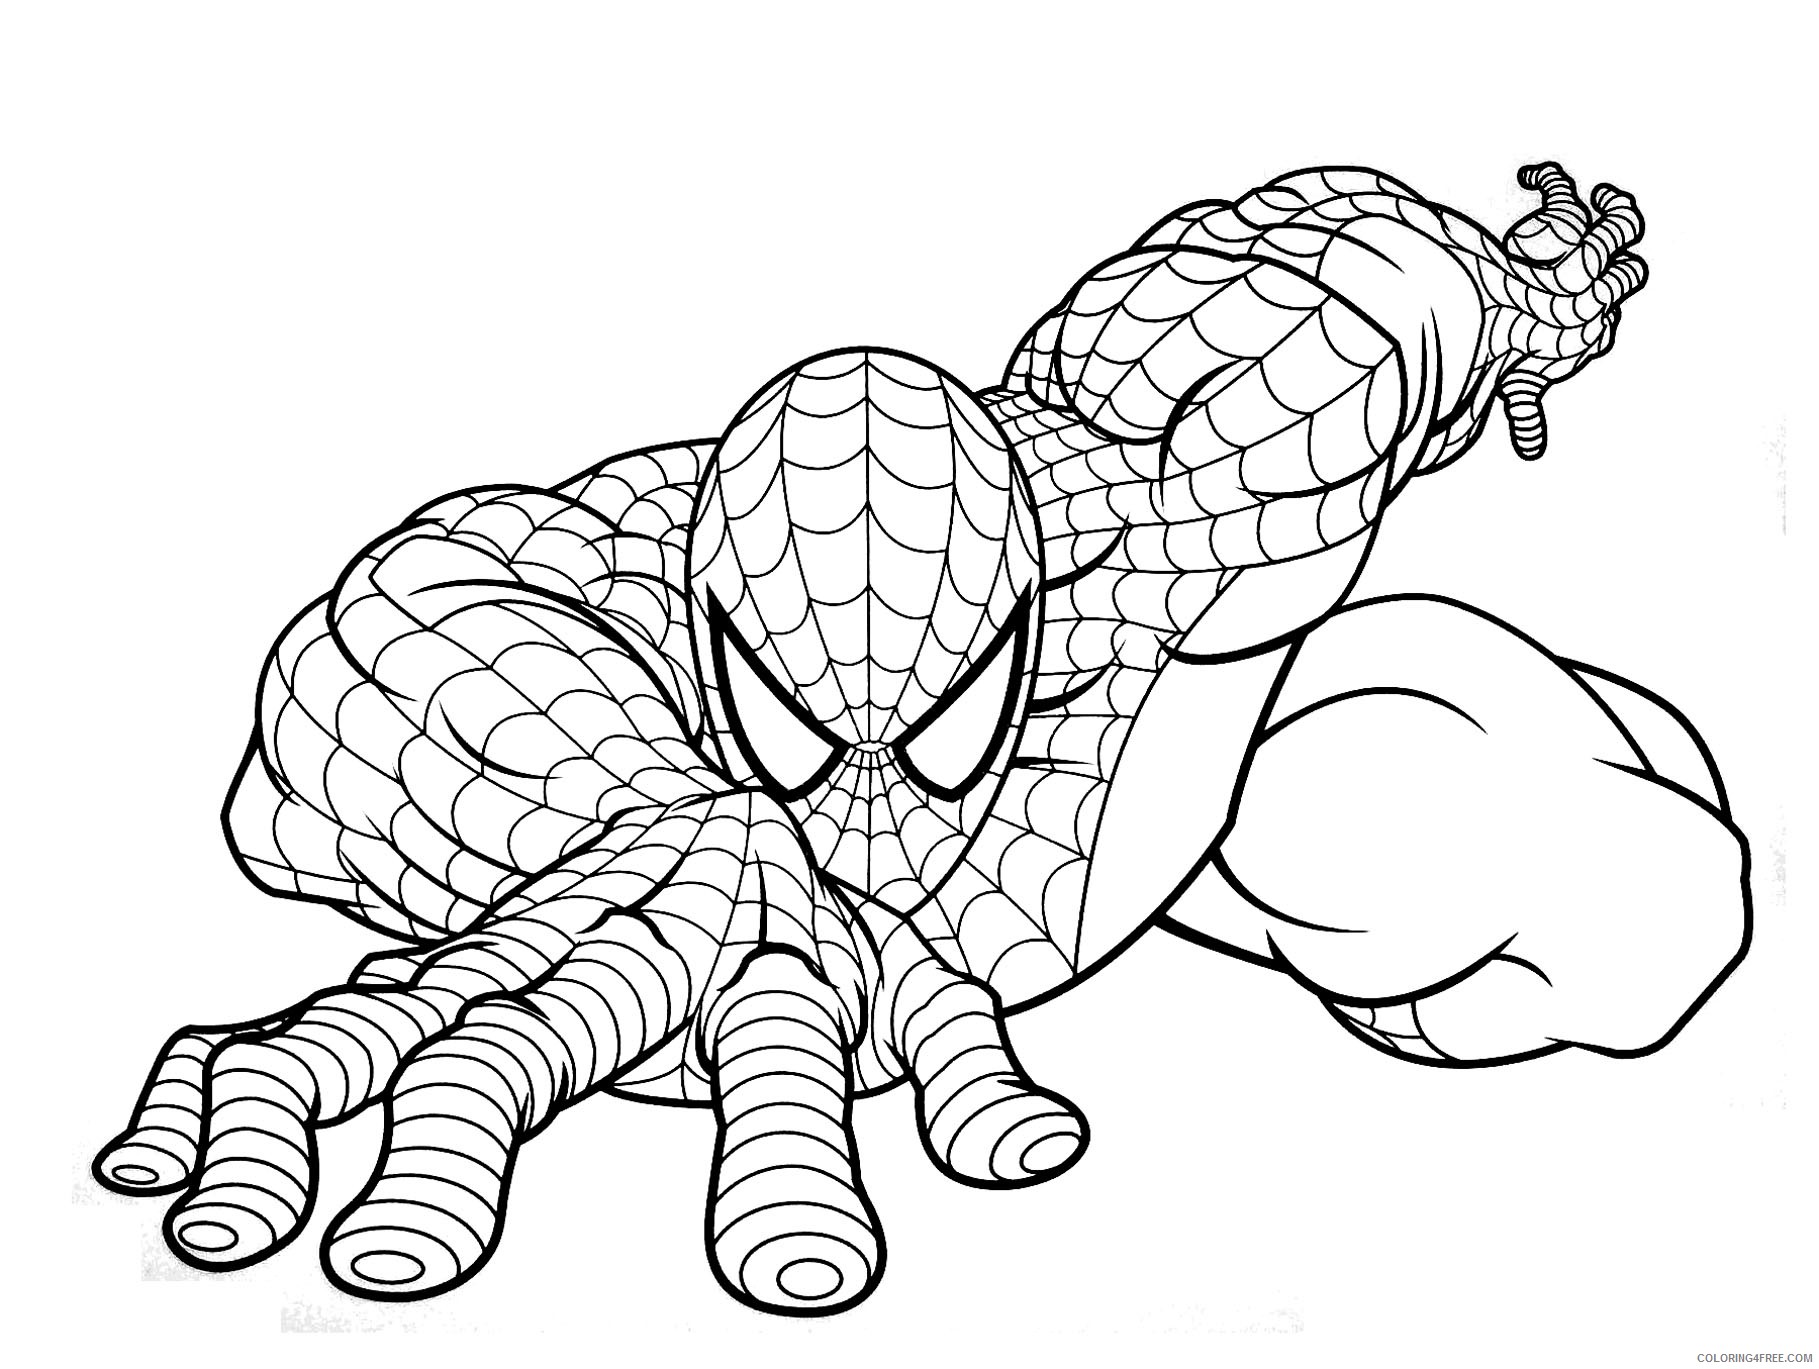 spiderman coloring pages climbing pose Coloring4free